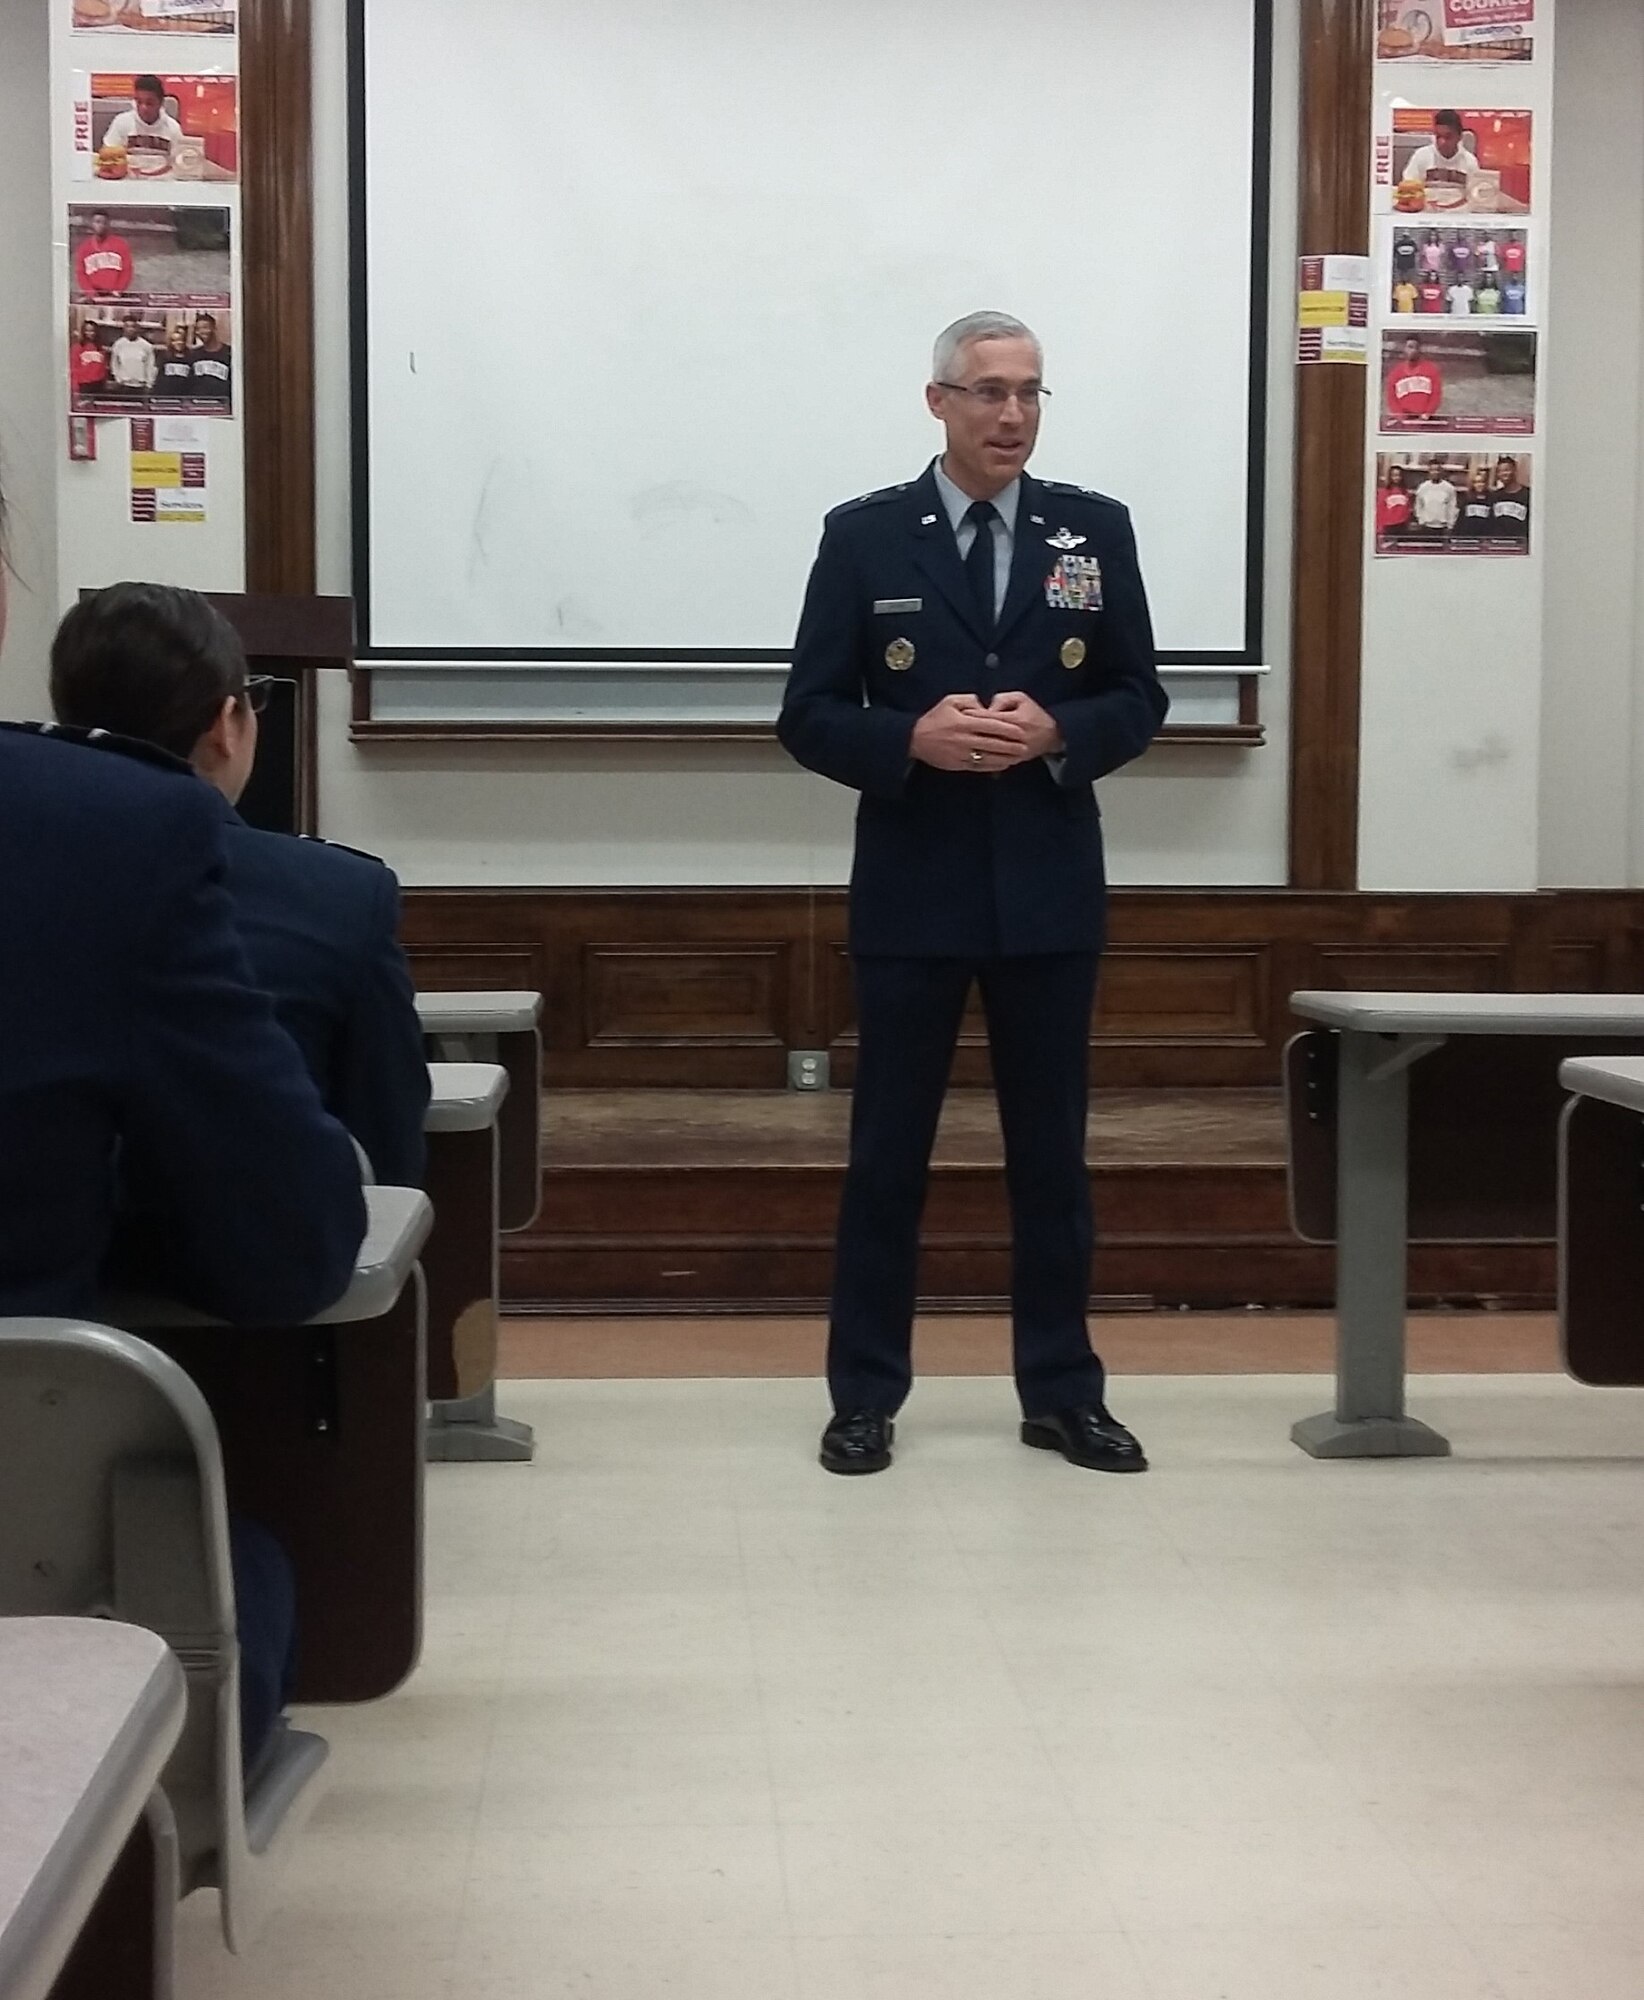 Brig. Gen. Craig La Fave, the special assistant to the chief of the Air Force Reserve and military deputy to the total force continuum, deputy chief of staff strategic plans and programs, visits with Air Force ROTC Detachment 130 cadets at Howard University in Washington, D.C., Feb.  10, 2016. La Fave, who served as a C-141 Starlifter pilot during Operation Desert Storm, spoke to the cadets about his experiences serving in the conflict 25 years ago and discussed how lessons learned from Desert Storm have helped shape the Air Force of today. (U.S. Air Force photo/Zach Anderson)